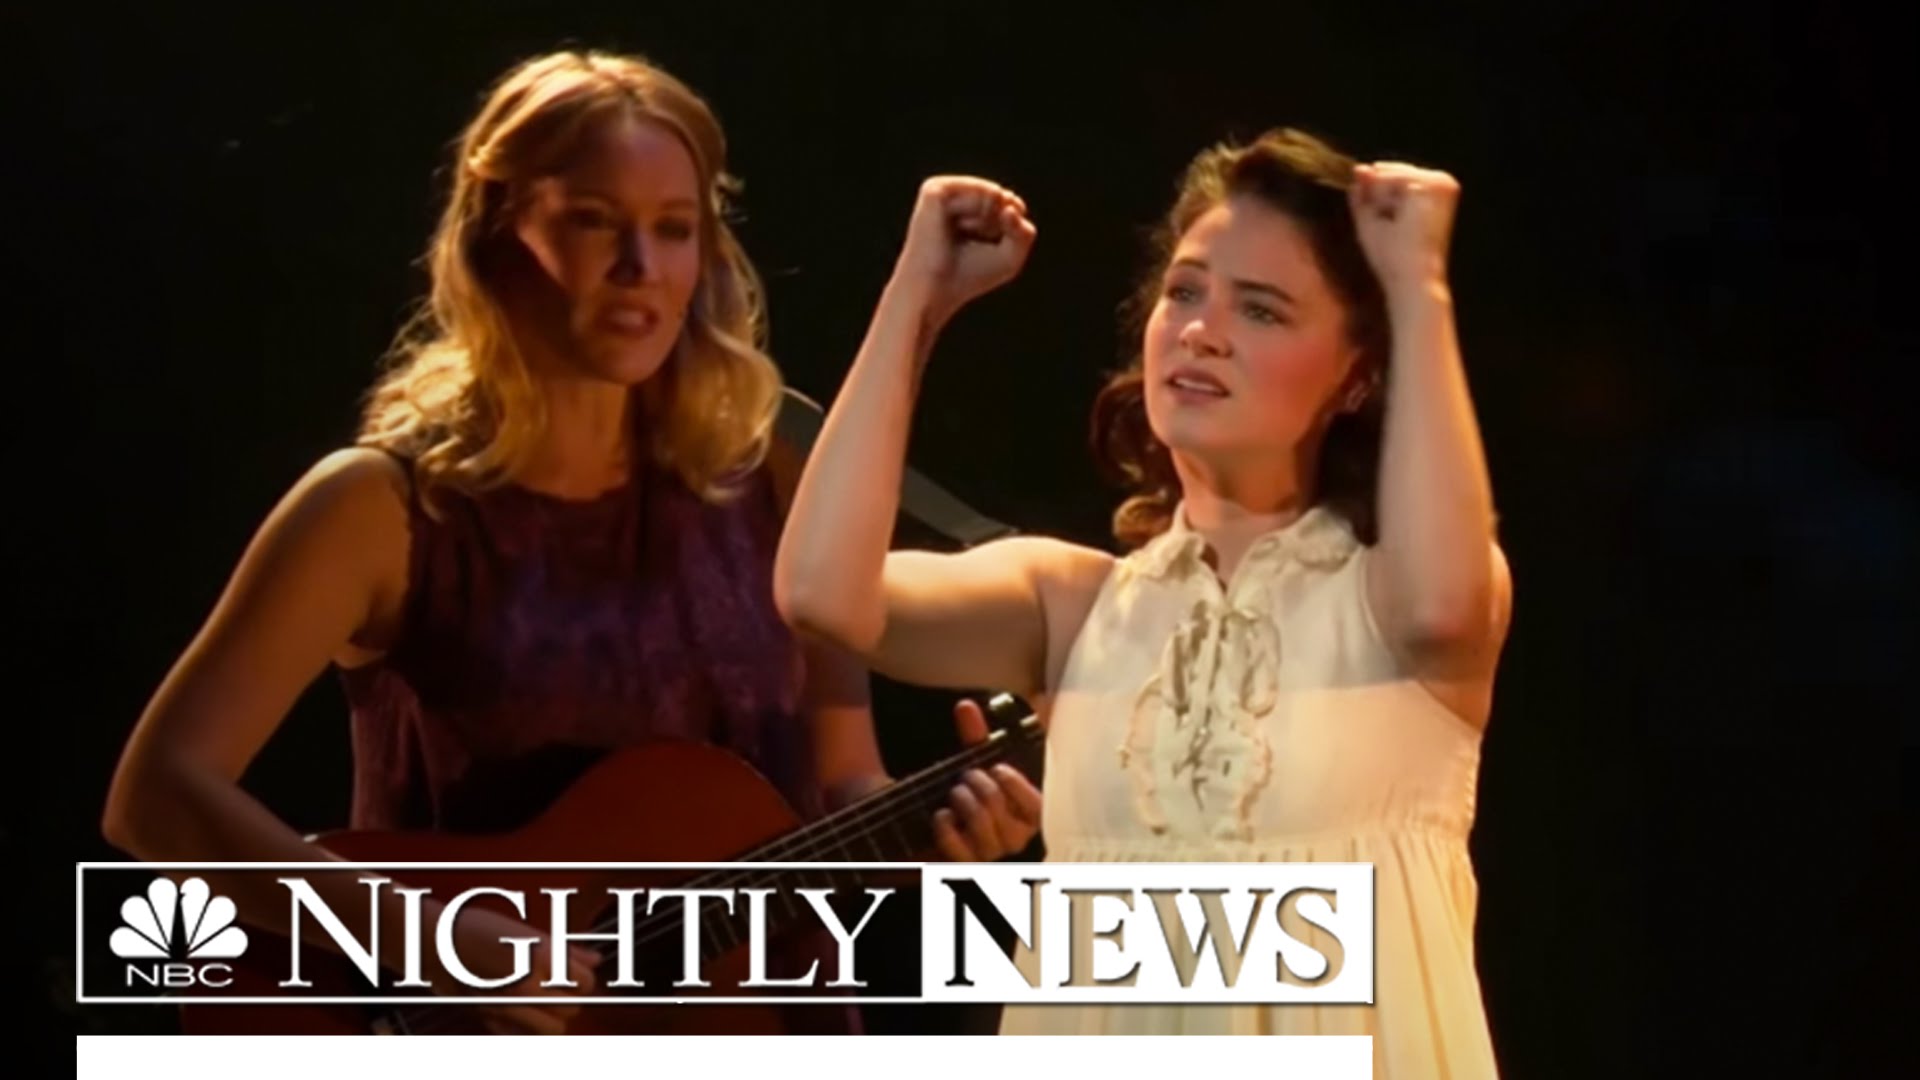 NBC's Nightly News features the groundbreaking Broadway revival of Spring Awakening
